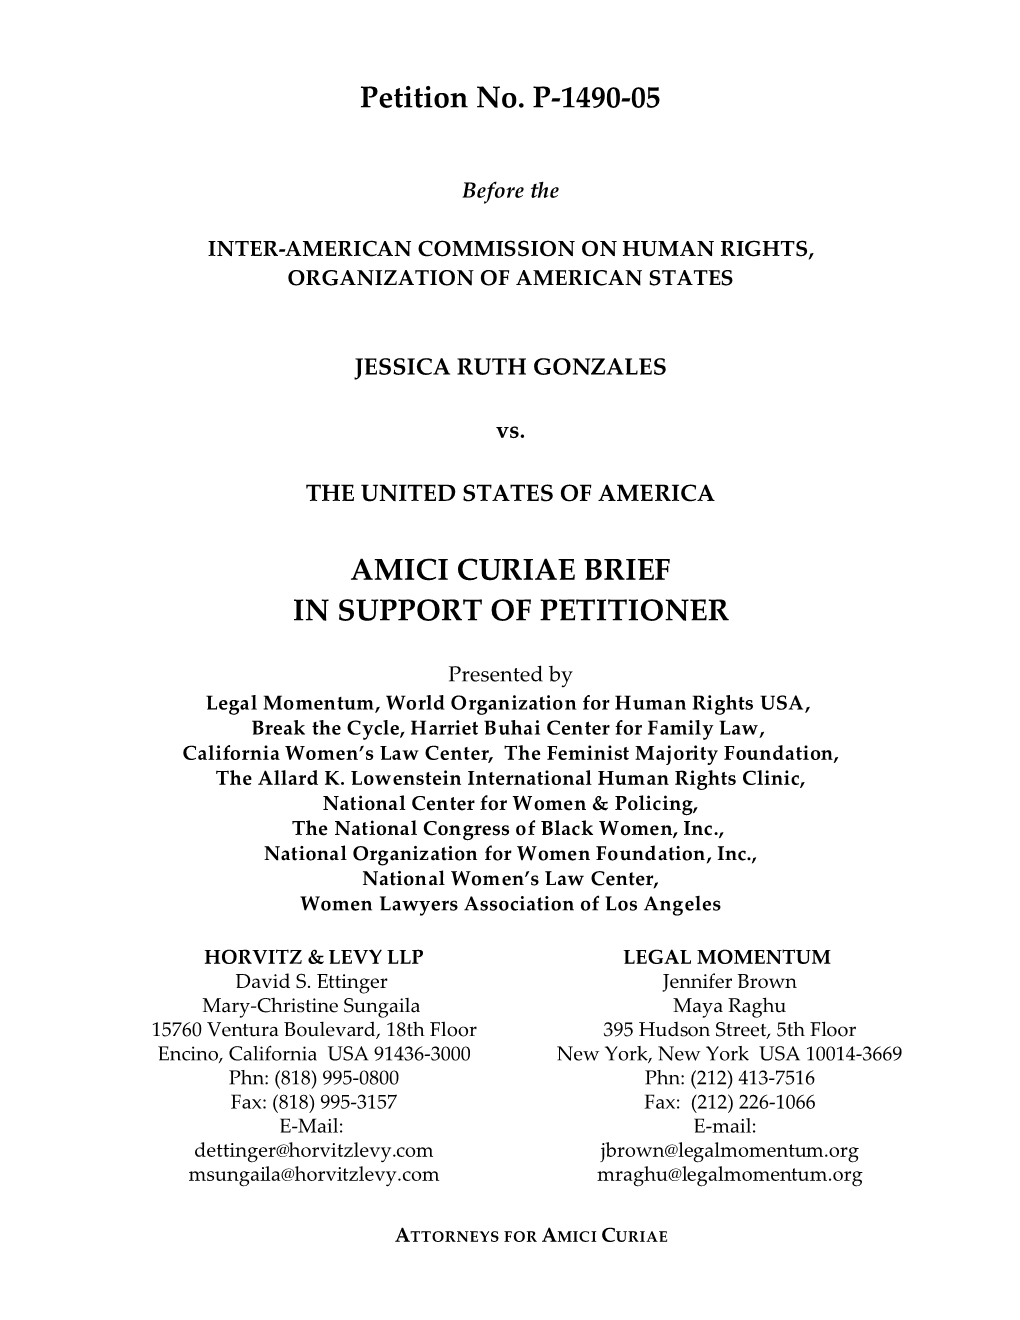 Petition No. P-1490-05 AMICI CURIAE BRIEF in SUPPORT OF